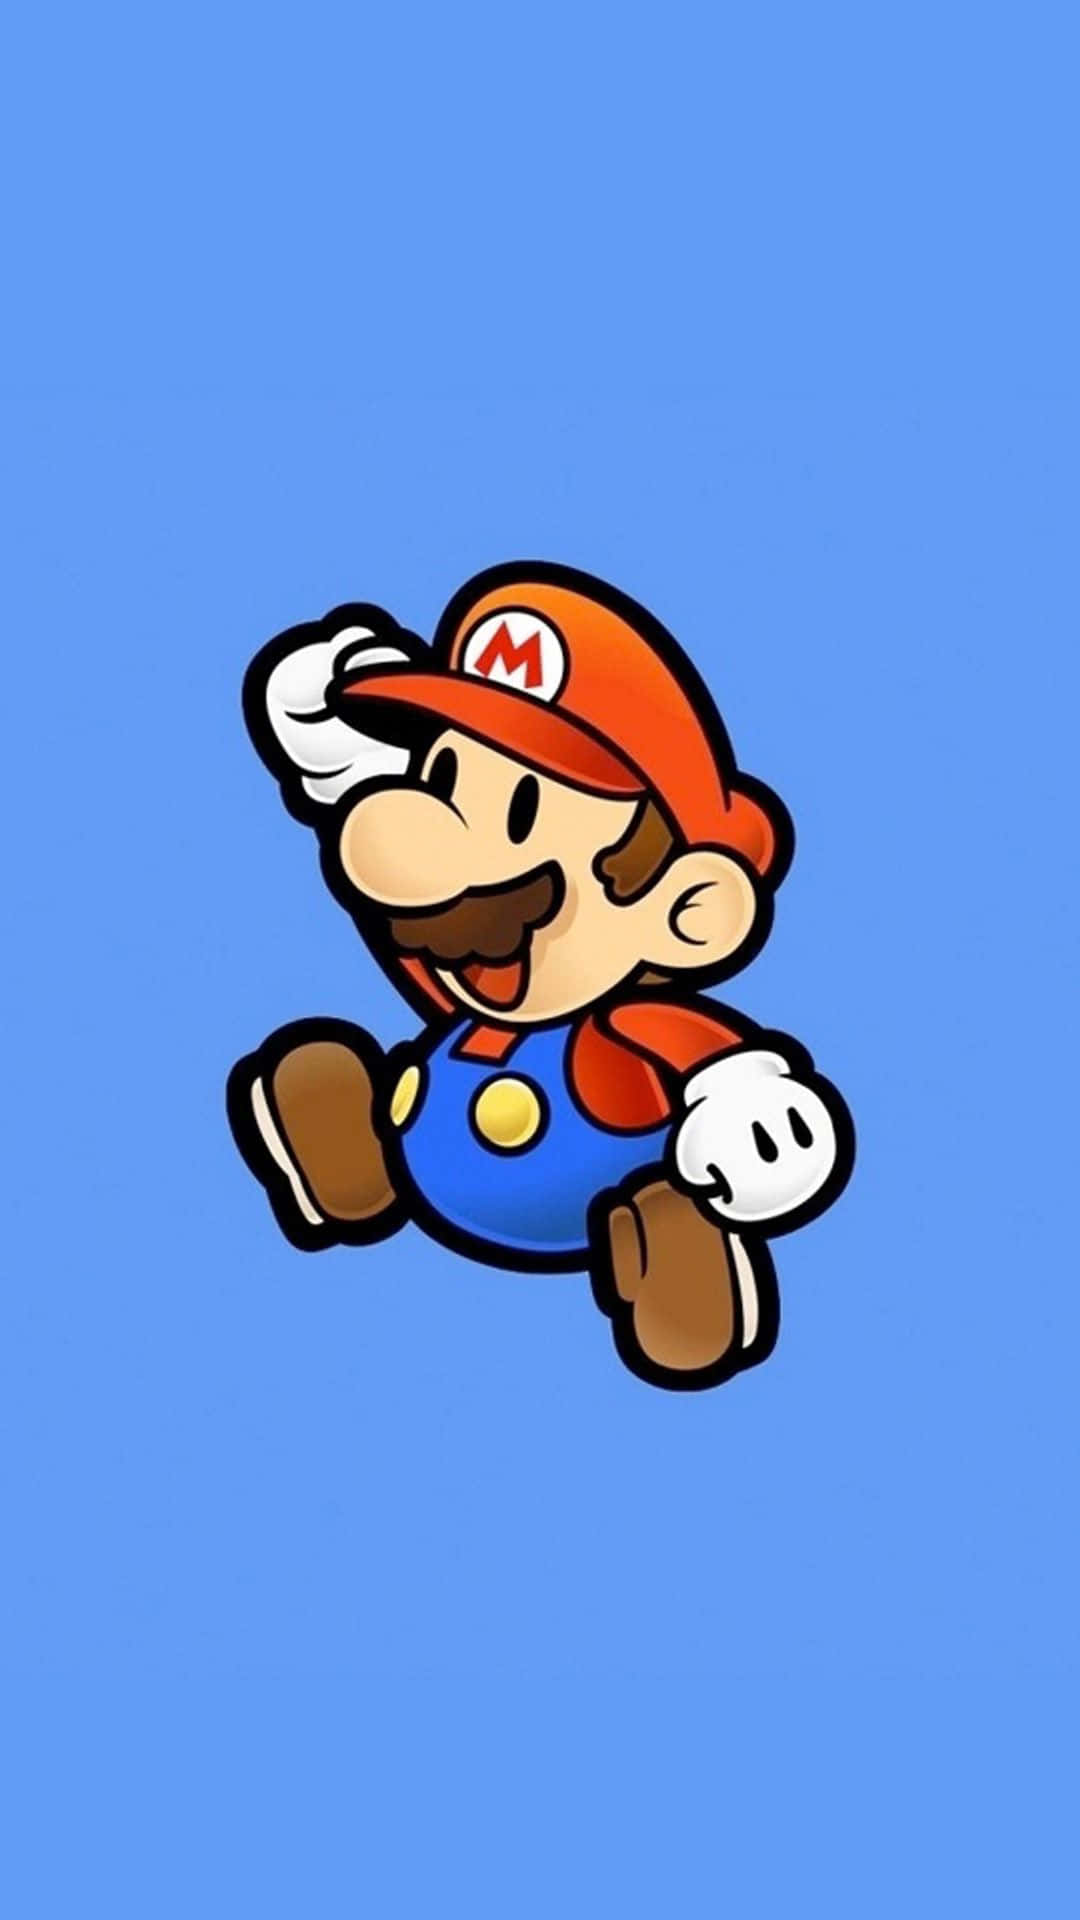 A Nintendo Mario Character Is Running On A Blue Background Wallpaper